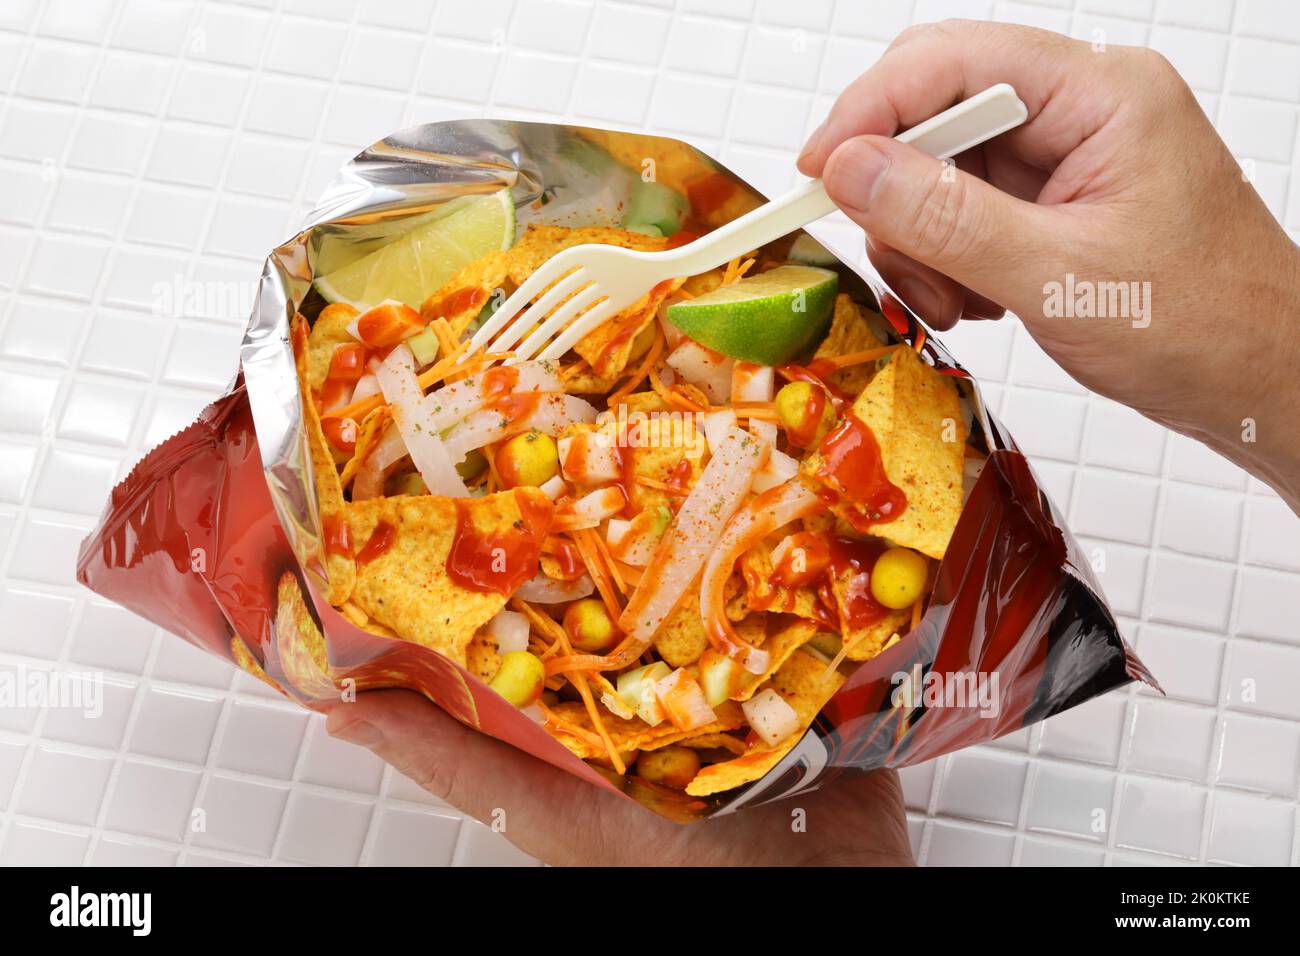 Dorilocos is a Mexican antojito (street food). Stock Photo